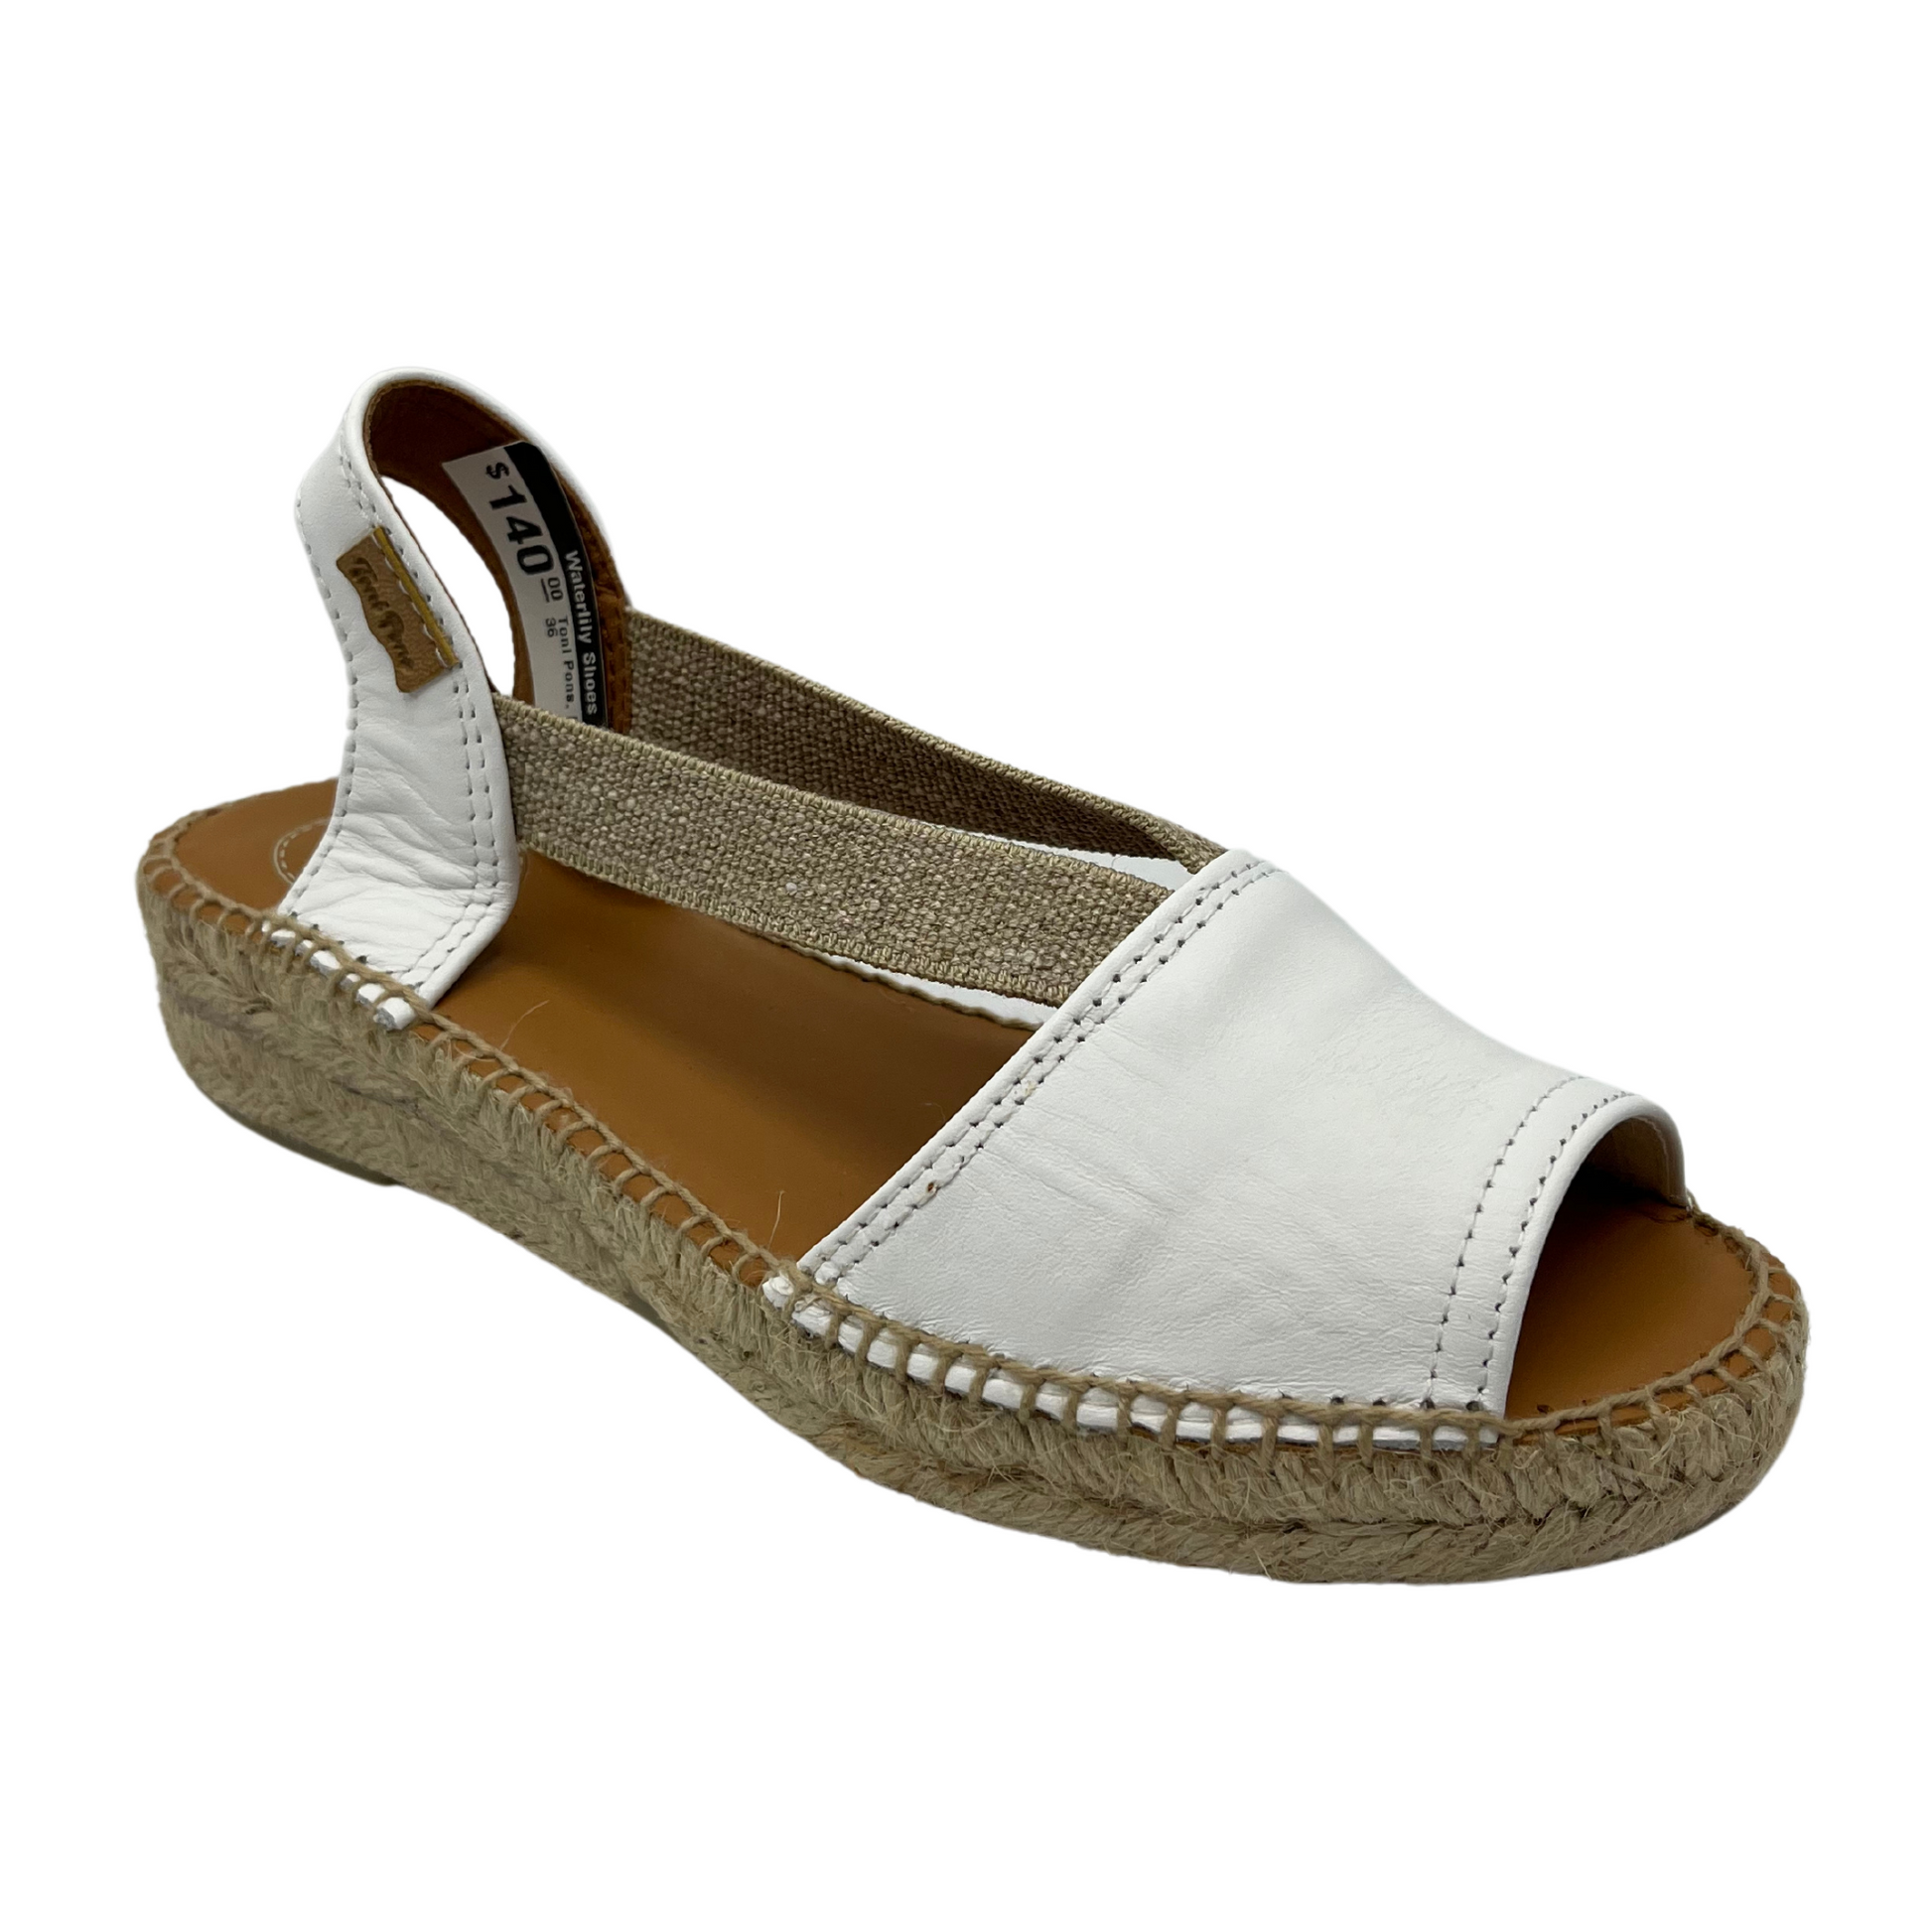 45 degree angled view of white leather sandals with double elastic straps and rounded toe